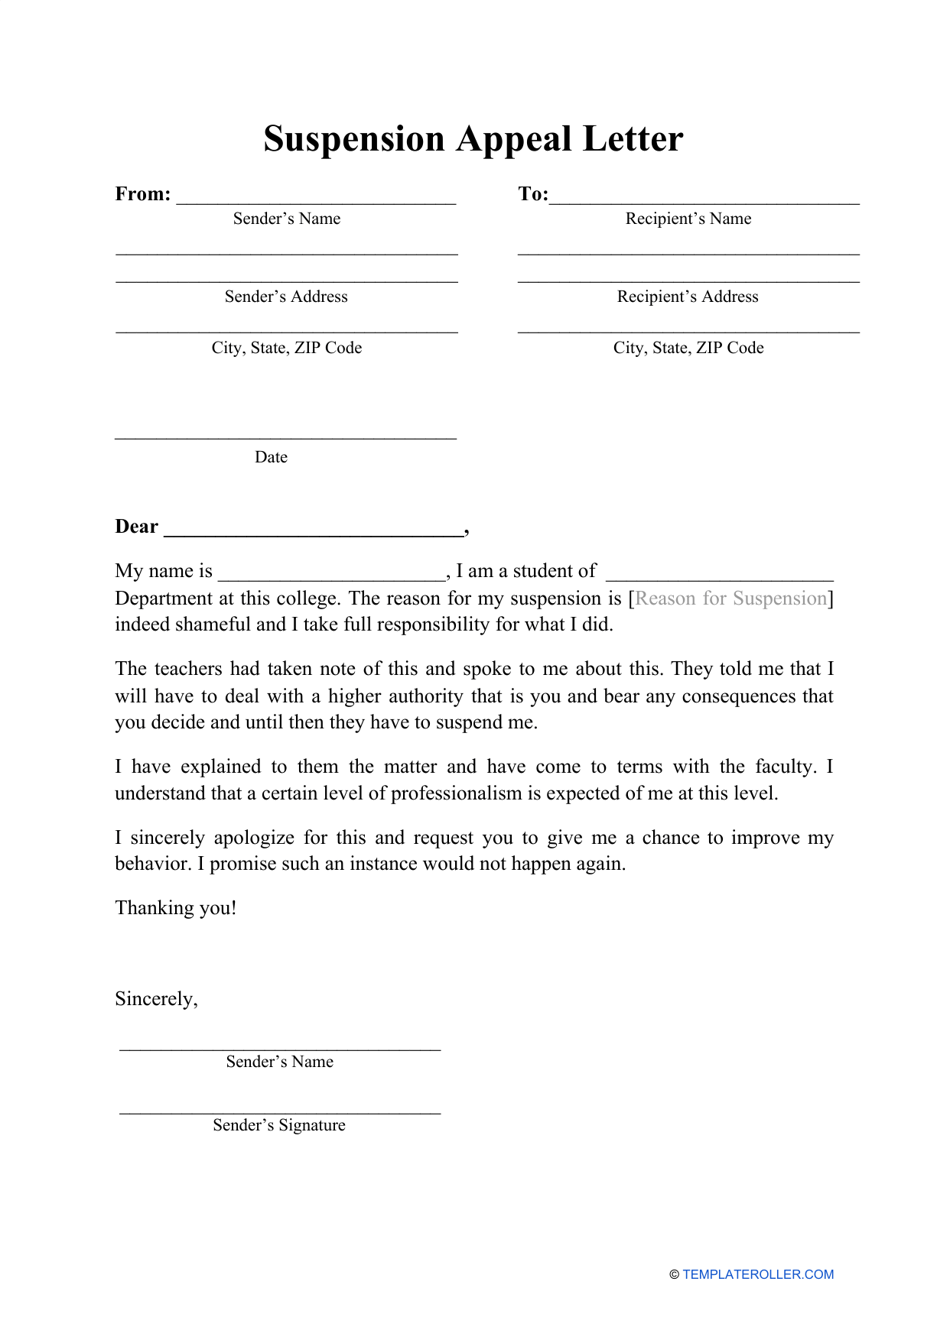 Suspension Appeal Letter Template - Professional Format | TemplateRoller